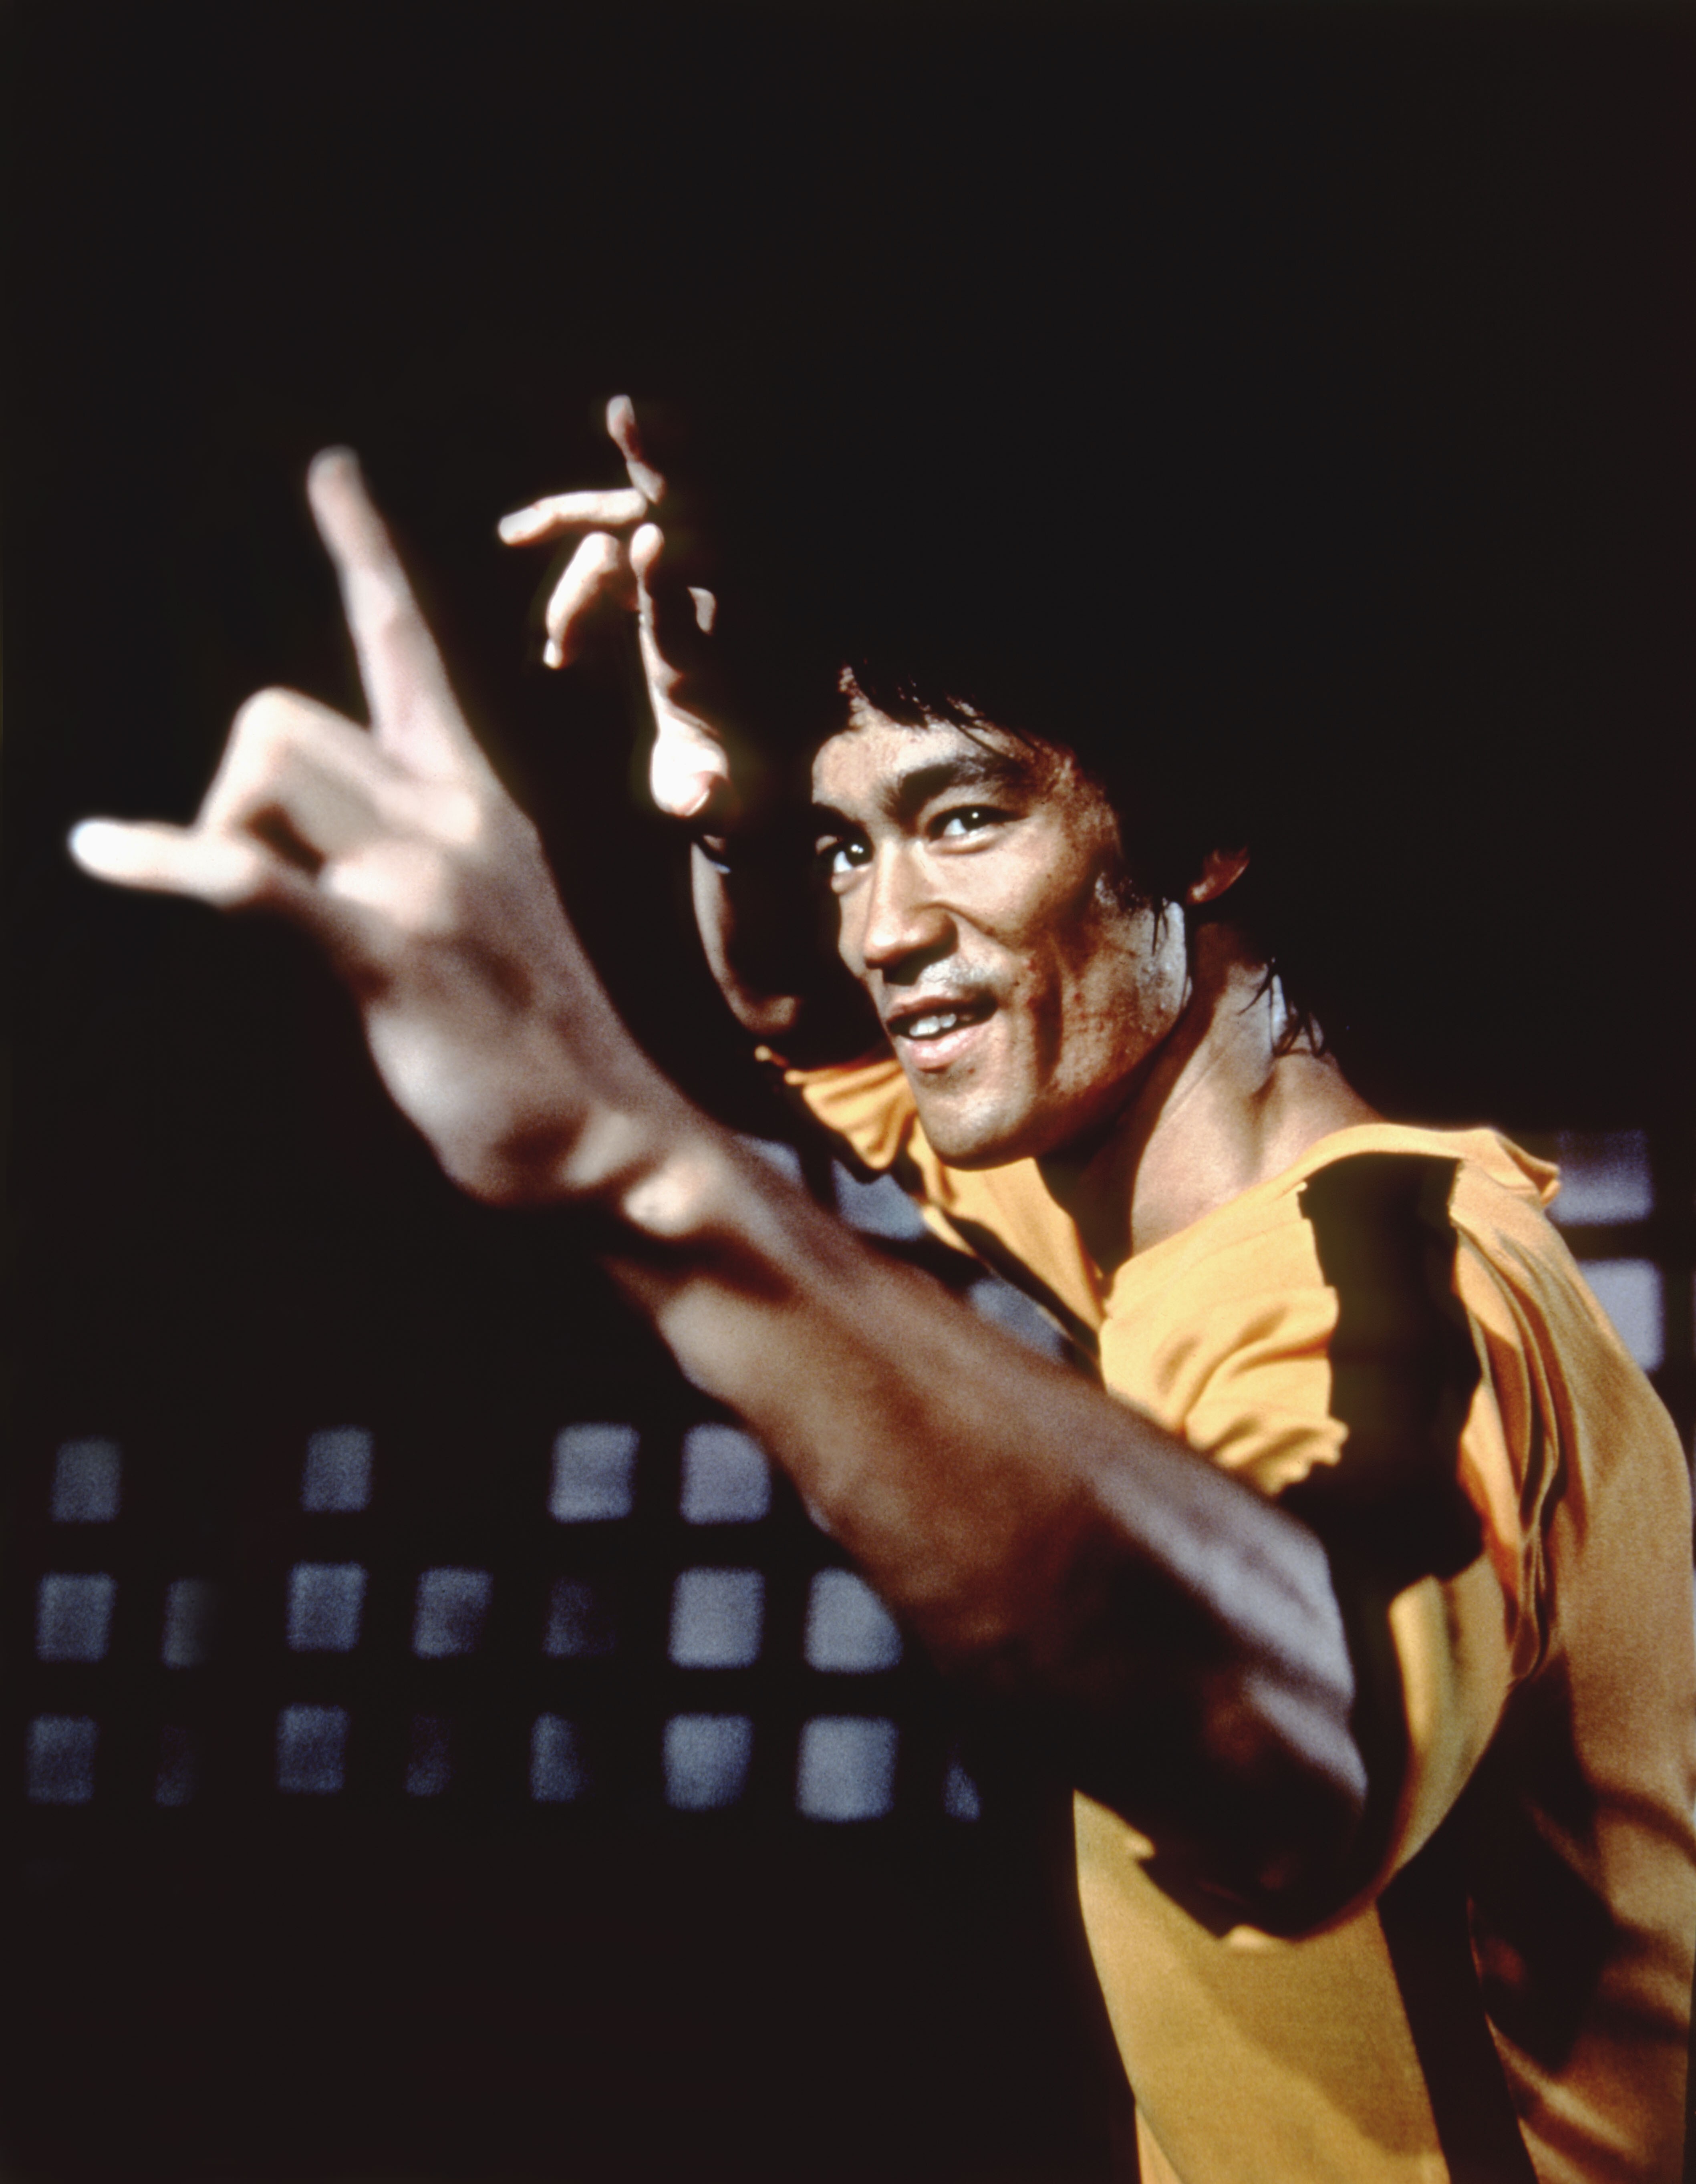 Bruce Lee in Game of Death (1978). Photo: Concord Productions/Columbia Pictures/Golden Harvest